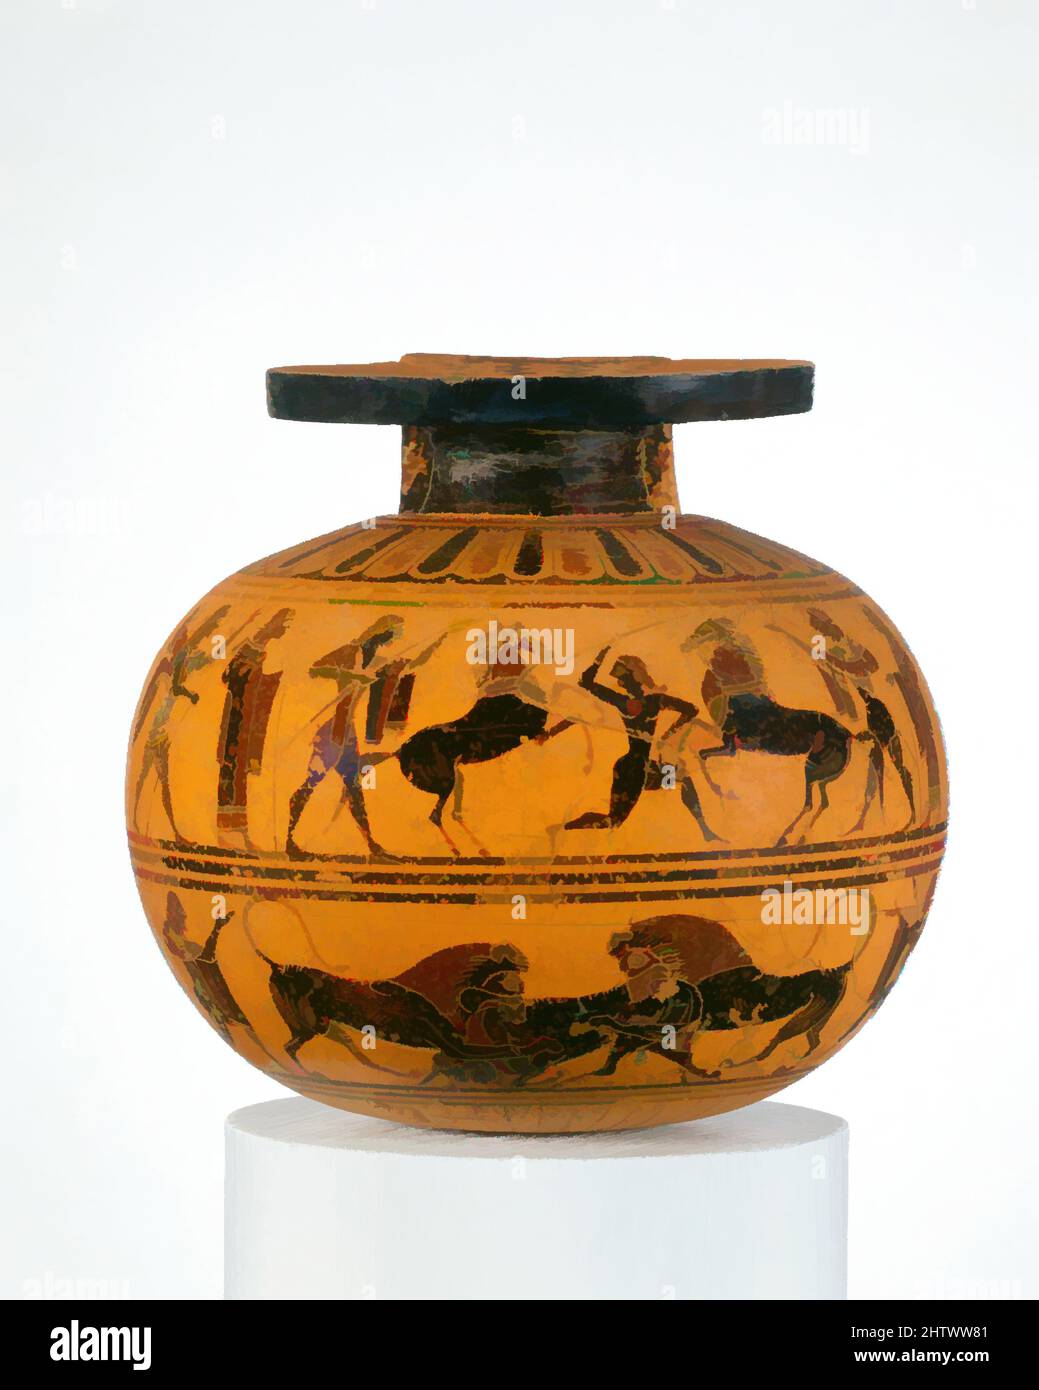 Art inspired by Terracotta aryballos (oil flask), Archaic, ca. 550 B.C., Greek, Attic, Terracotta; black-figure, H. 3 1/4 in. (8.3 cm), Vases, On the handle, Dionysos and two revelers, Upper frieze, horse tamer between onlookers and two wrestlers, Lower frieze, animal combats between, Classic works modernized by Artotop with a splash of modernity. Shapes, color and value, eye-catching visual impact on art. Emotions through freedom of artworks in a contemporary way. A timeless message pursuing a wildly creative new direction. Artists turning to the digital medium and creating the Artotop NFT Stock Photo